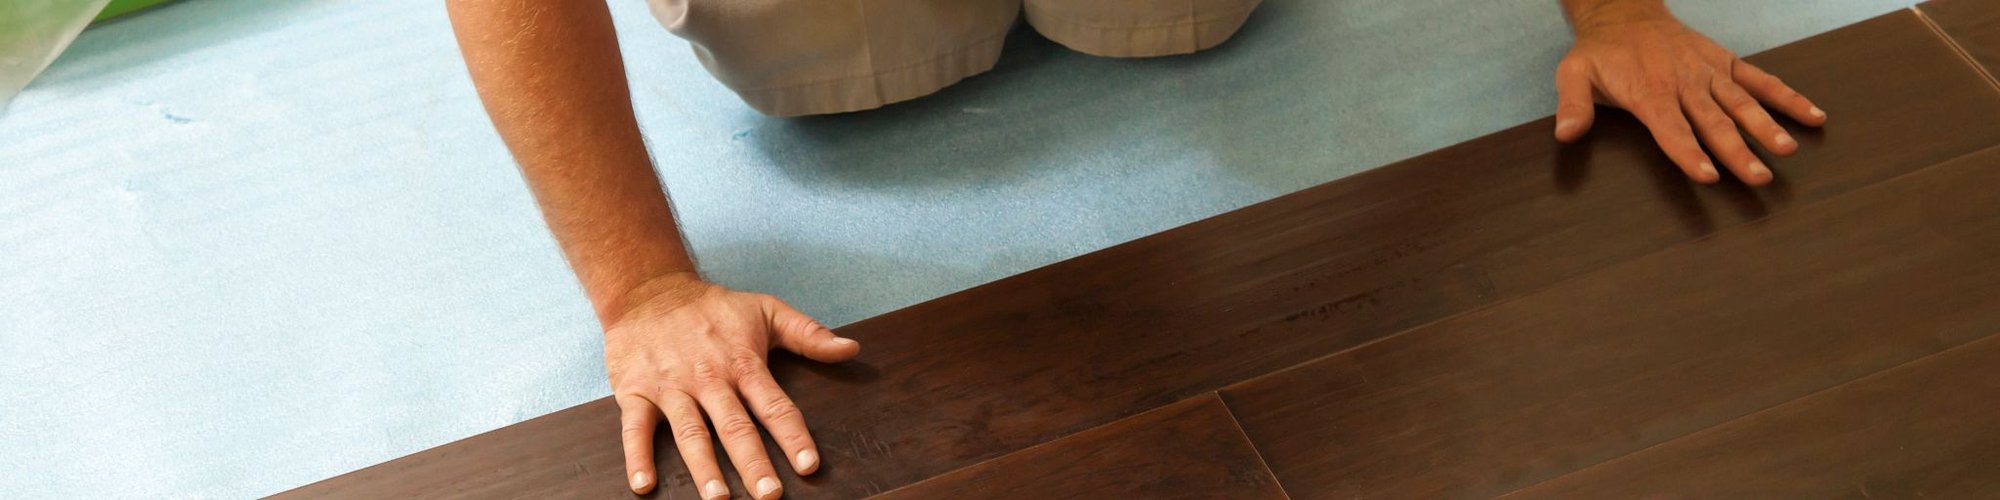 Hardwood installations from Carpet Mill Discounters Inc in Timonium